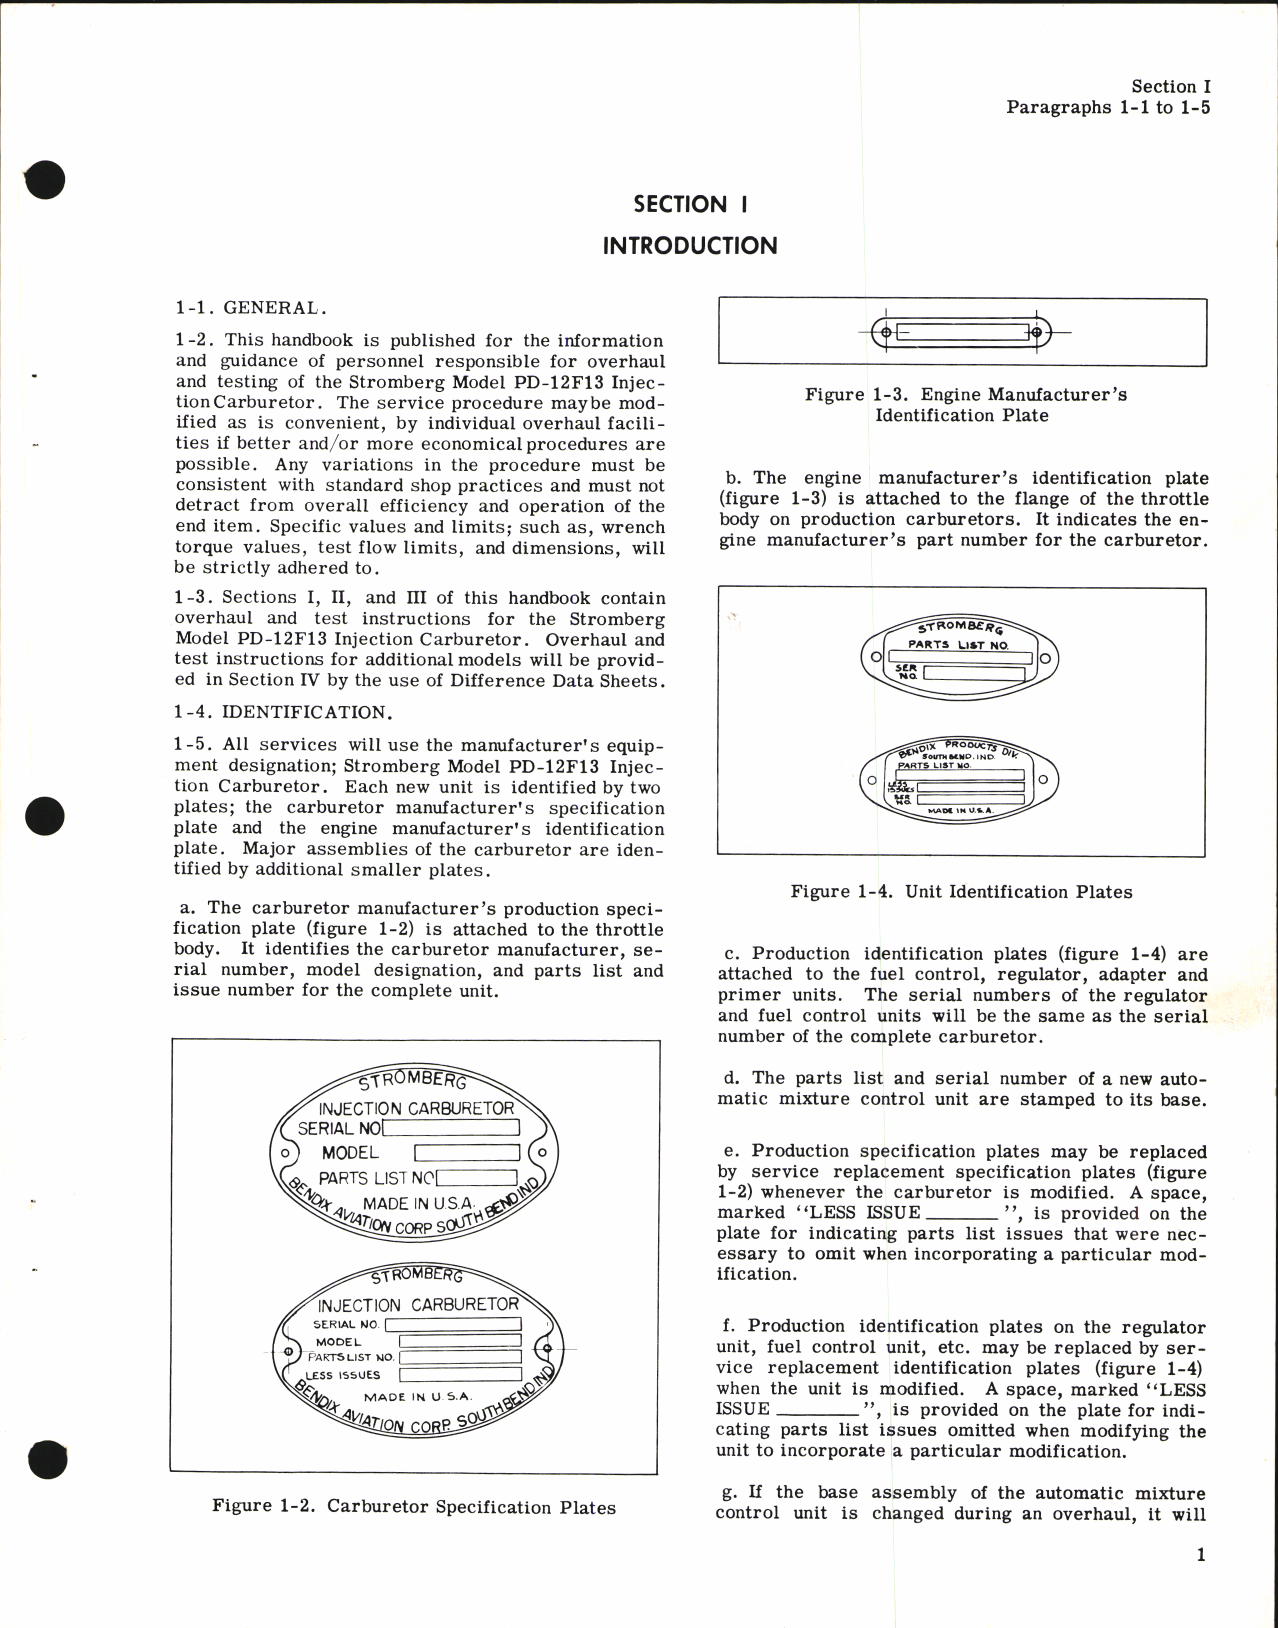 Sample page 5 from AirCorps Library document: Overhaul Instructions for Stromberg Injection Carburetor Model PD-12F13